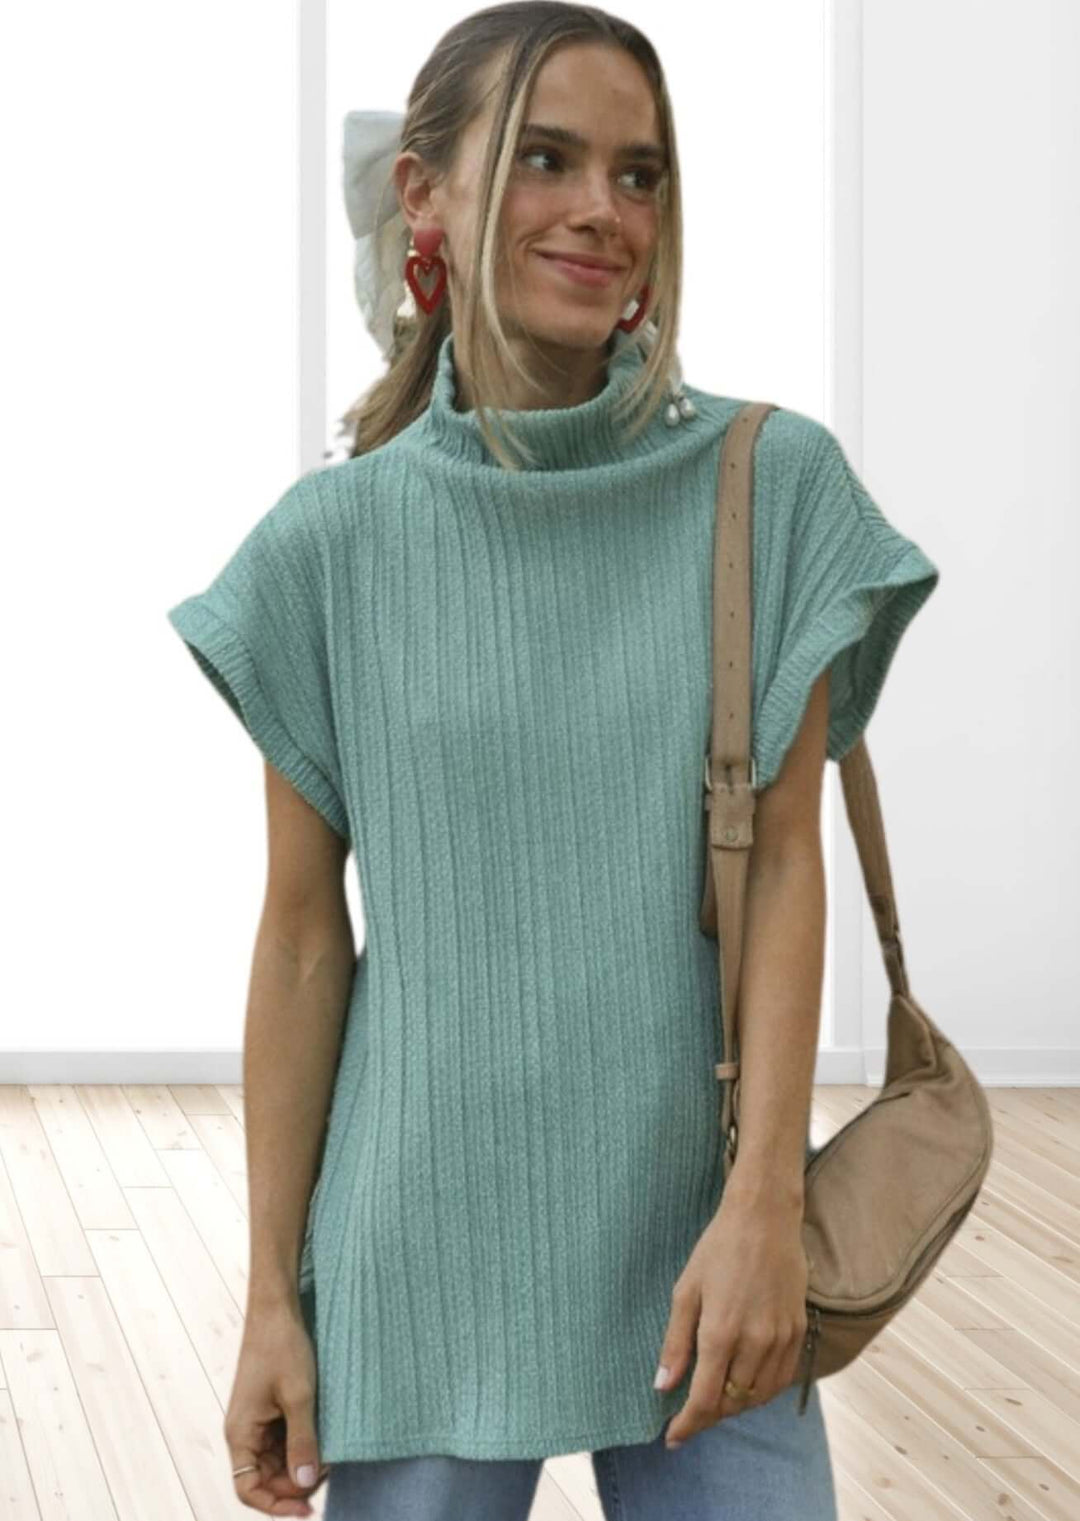 Made in USA Women's Mock Neck Soft Knit Top Sleeveless Drop Shoulder Sweater Vest with Side Slits in Teal | Classy Cozy Cool Women's Made in America Boutique